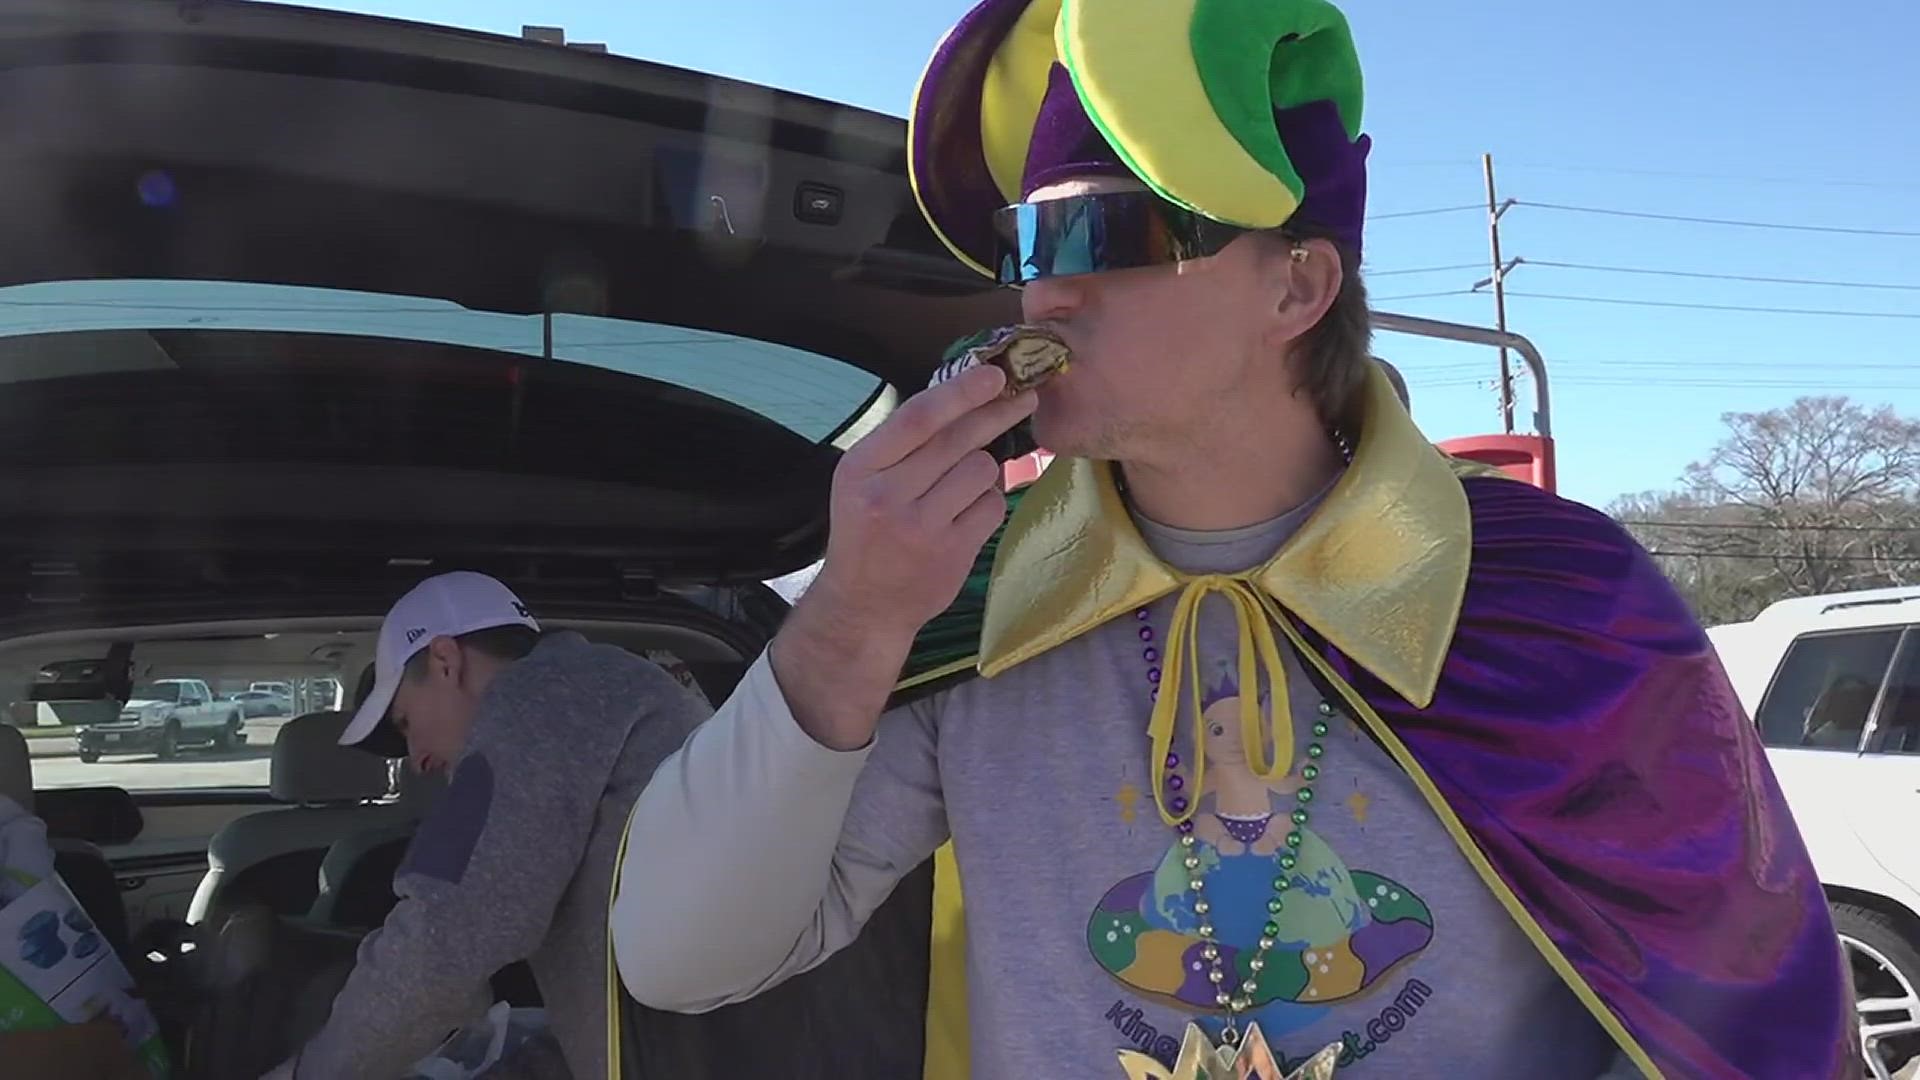 The Louisiana native has traveled to 100 bakers across Florida, Alabama, Mississippi and Louisiana in search of he most delicious and unique king cakes.